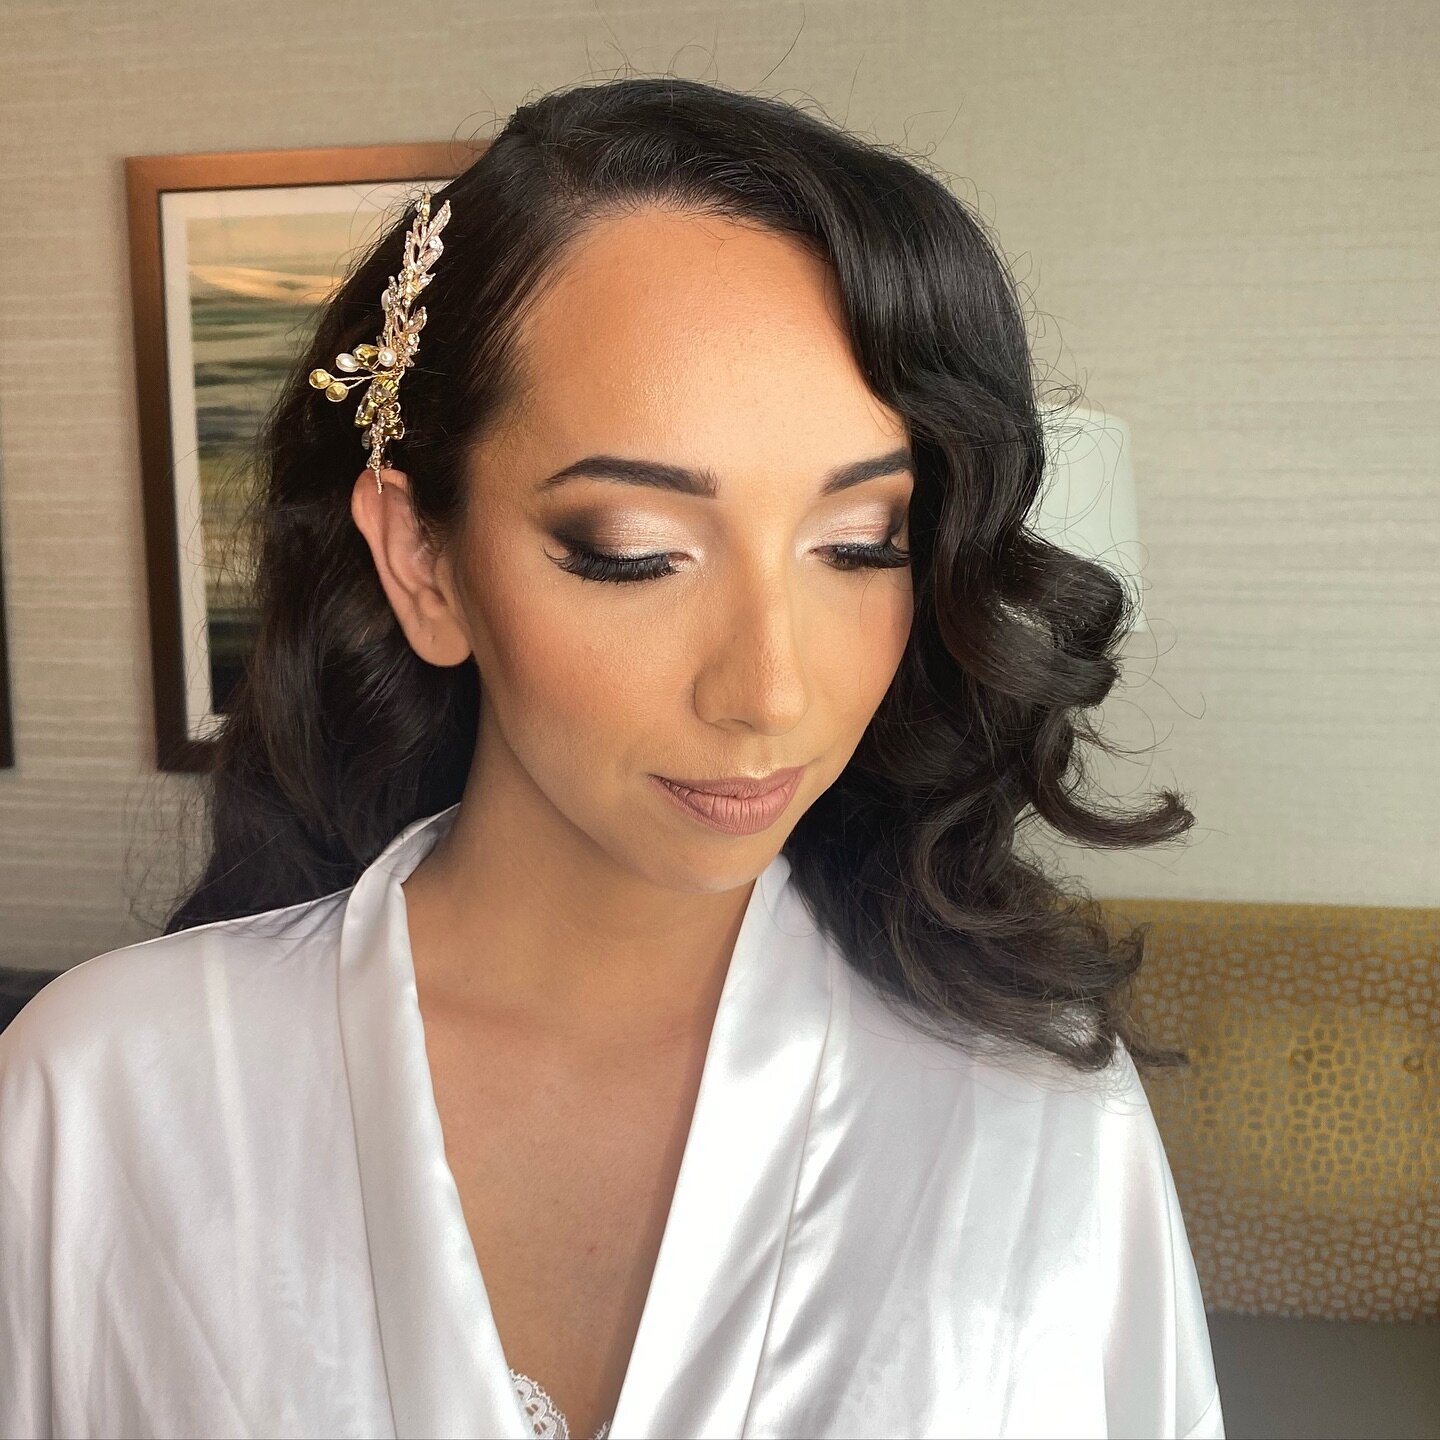 Loving this classic bridal glam! 🤍 You can never go wrong with this look!